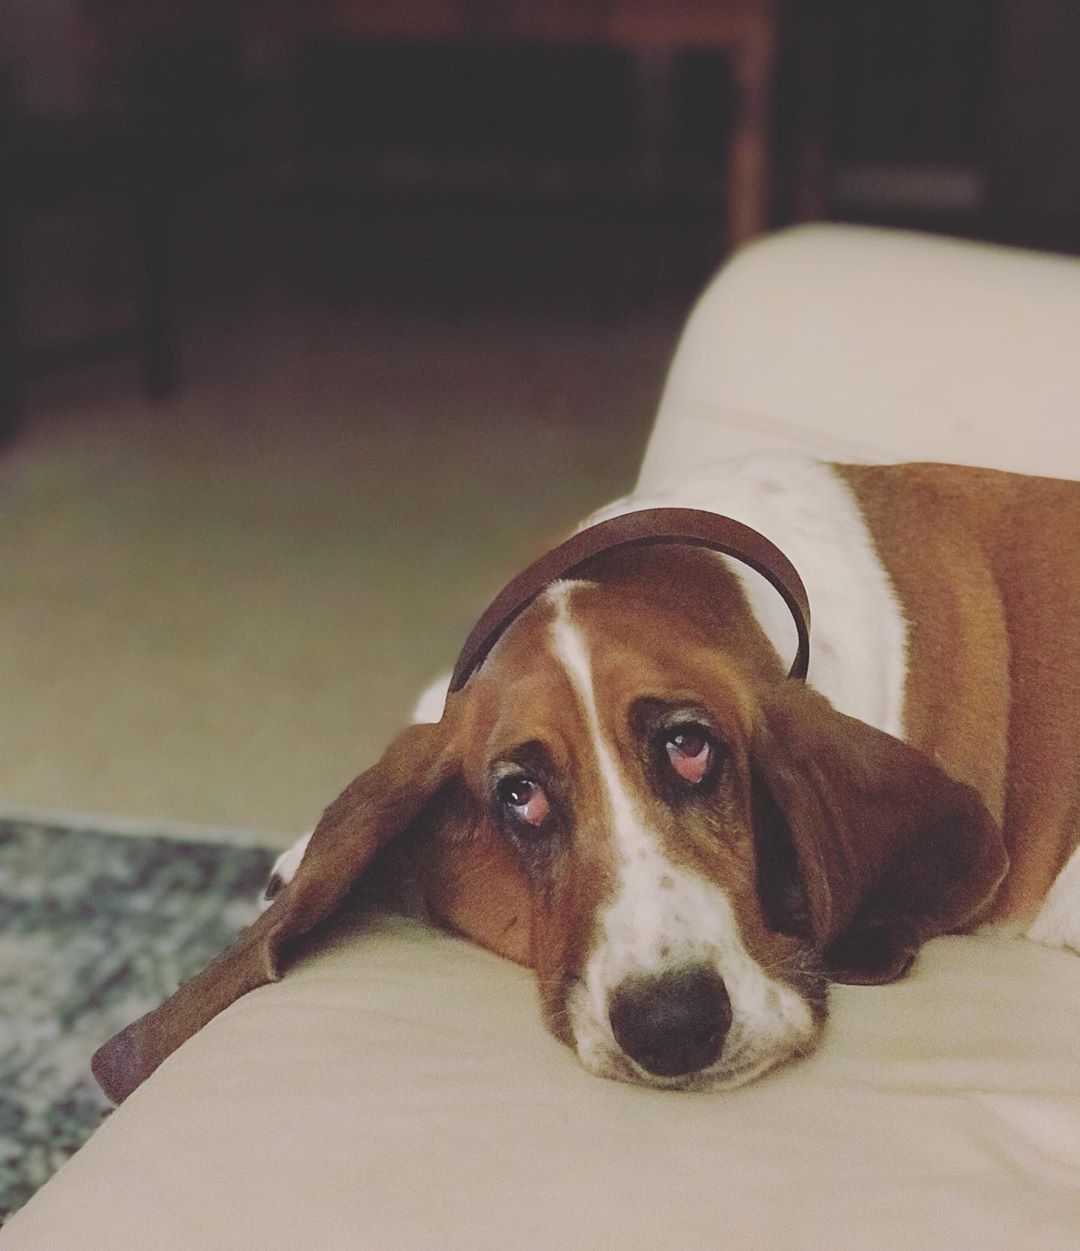 A Basset Hound lying on the couch with its sad face